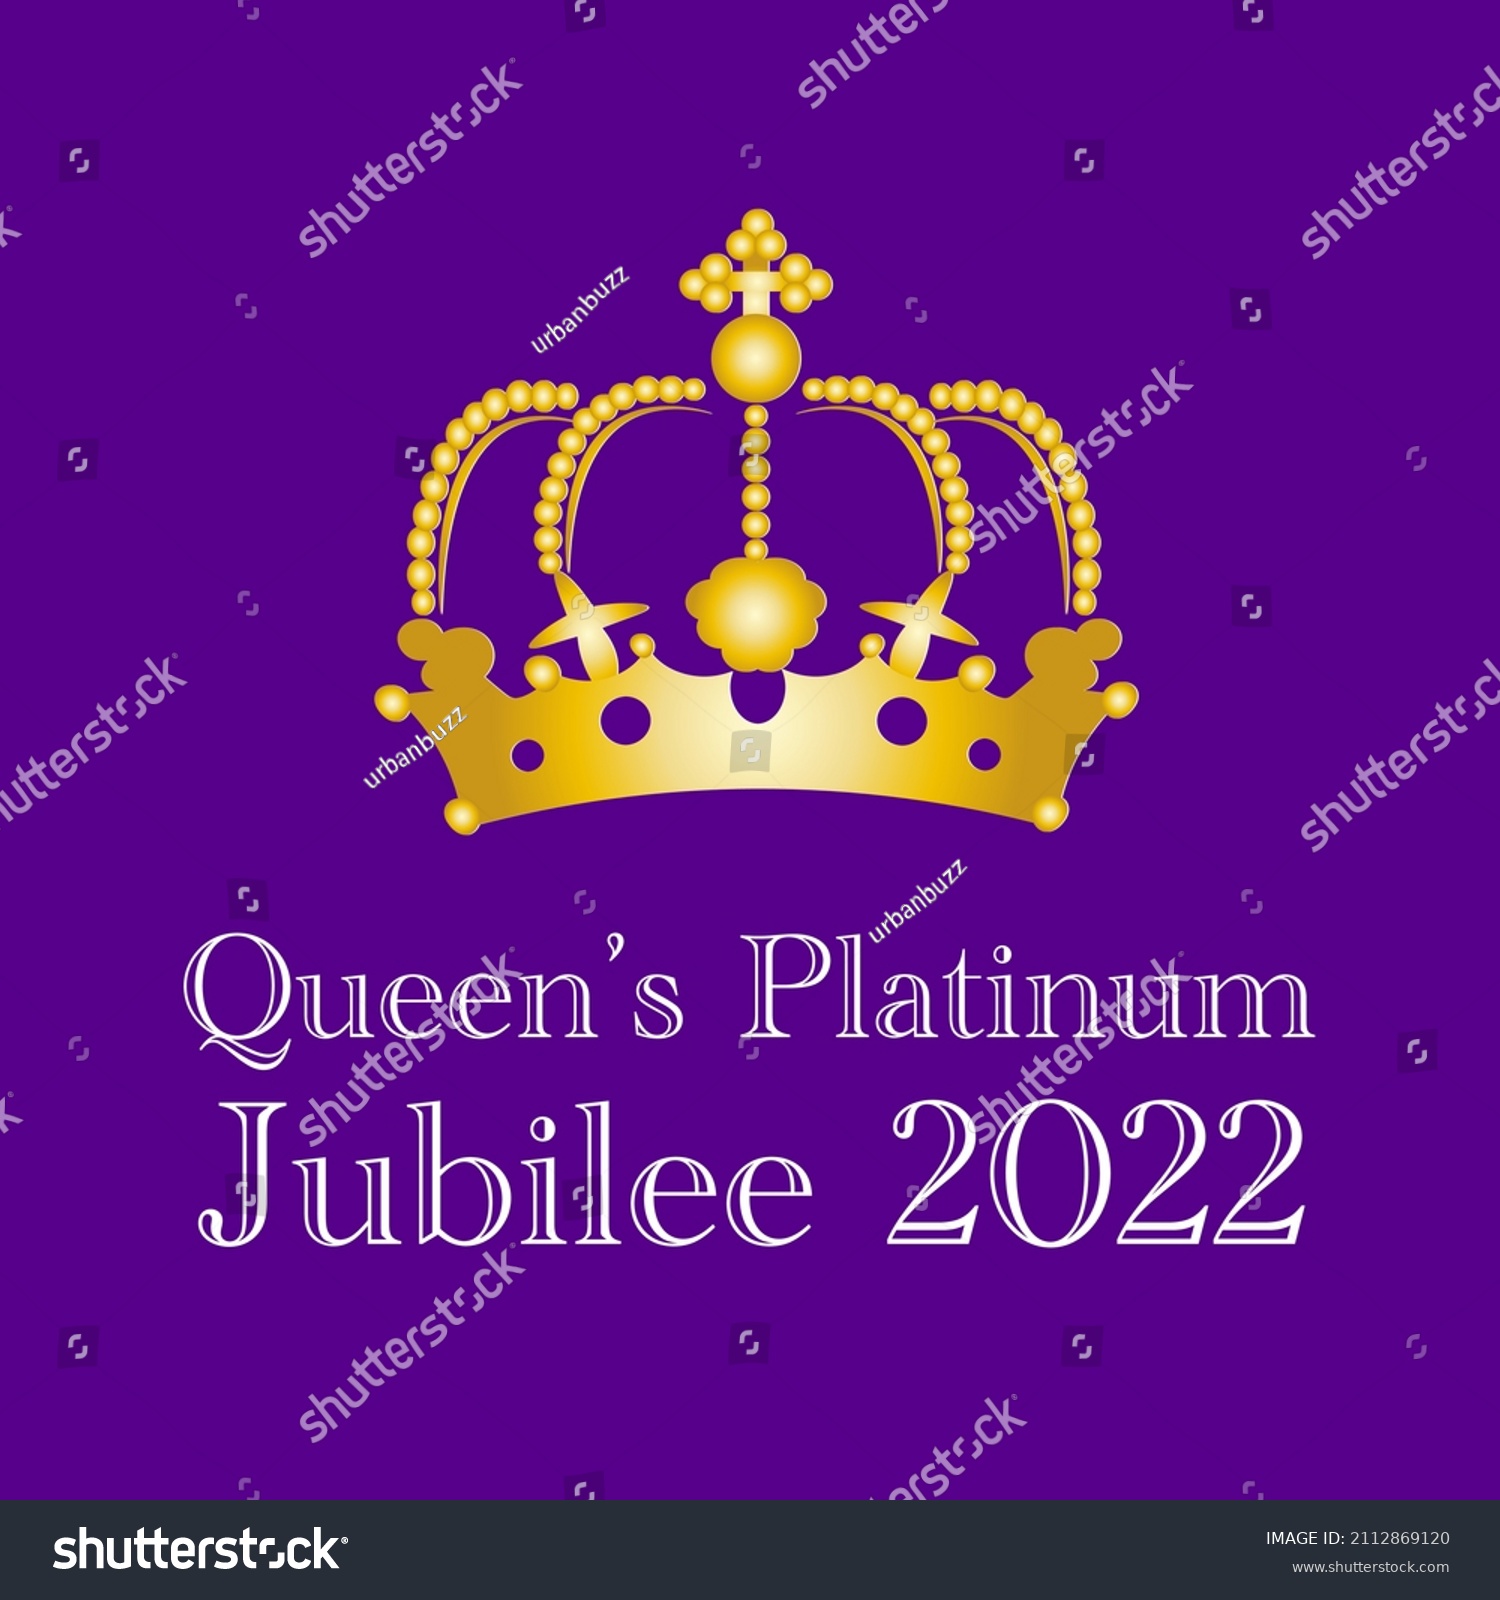 SVG of The Queens Platinum Jubilee 2022 - In 2022, Her Majesty The Queen will become the first British Monarch to celebrate a Platinum Jubilee after 70 years of service svg